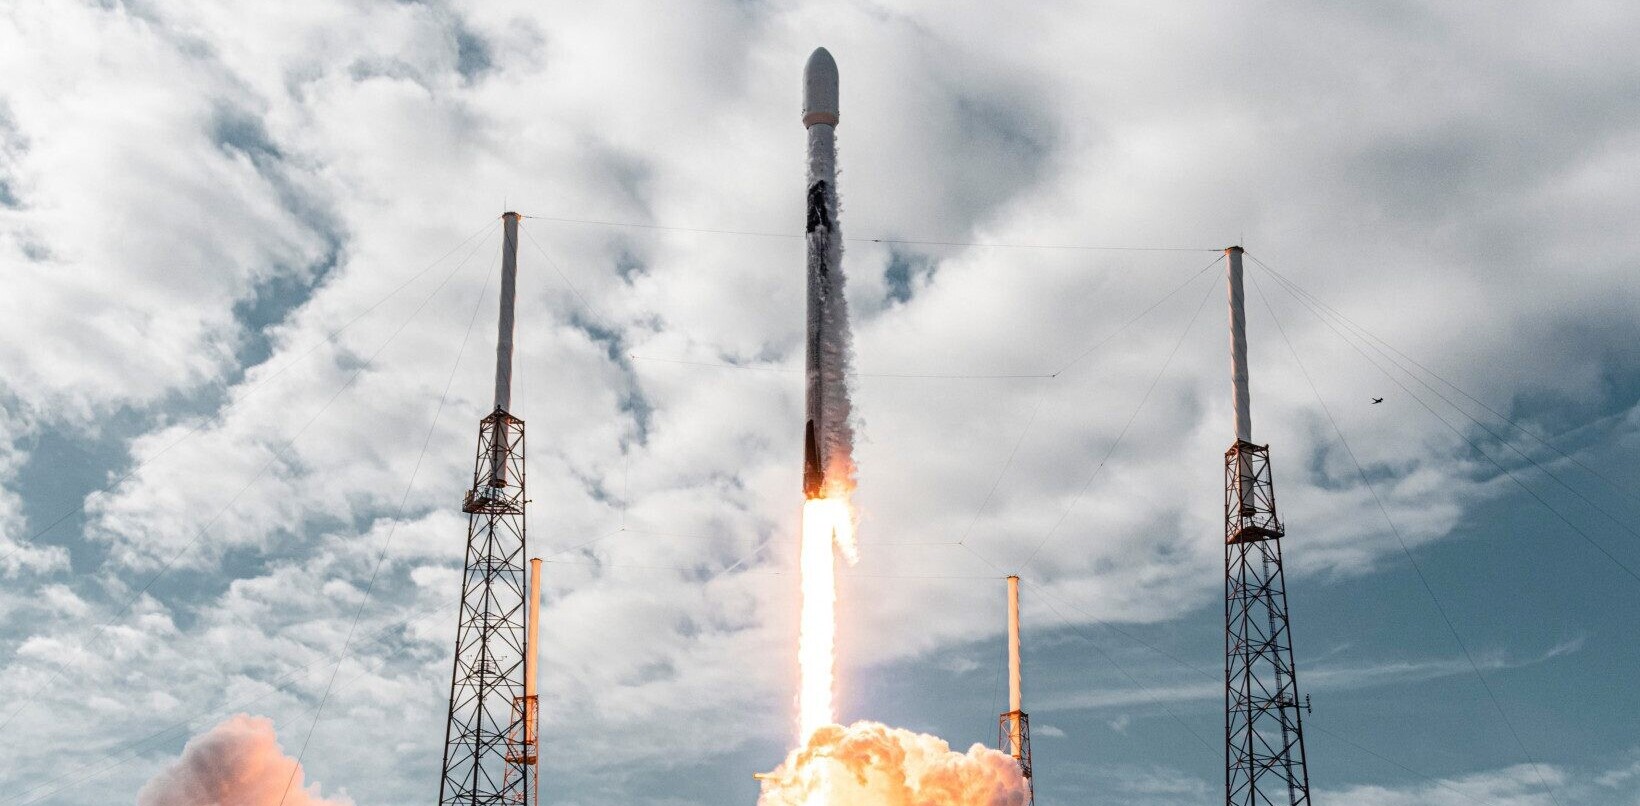 SpaceX breaks India’s record by launching 143 satellites on a single rocket